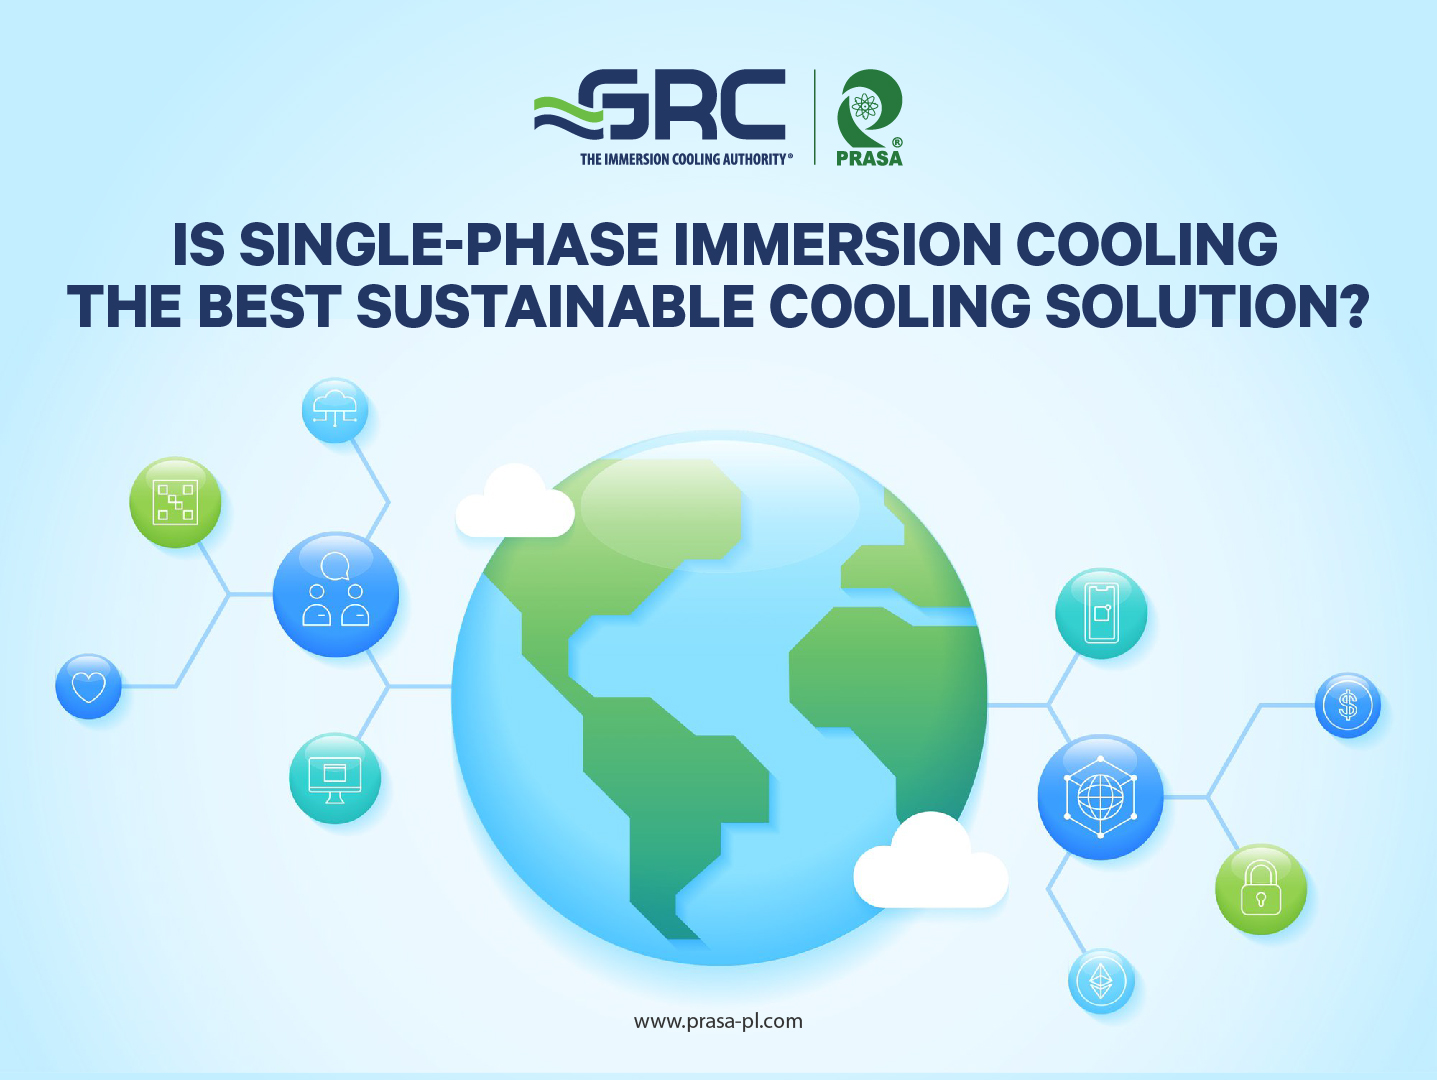 <strong>Is Single-Phase Immersion Cooling the Best Sustainable Cooling Solution?</strong>